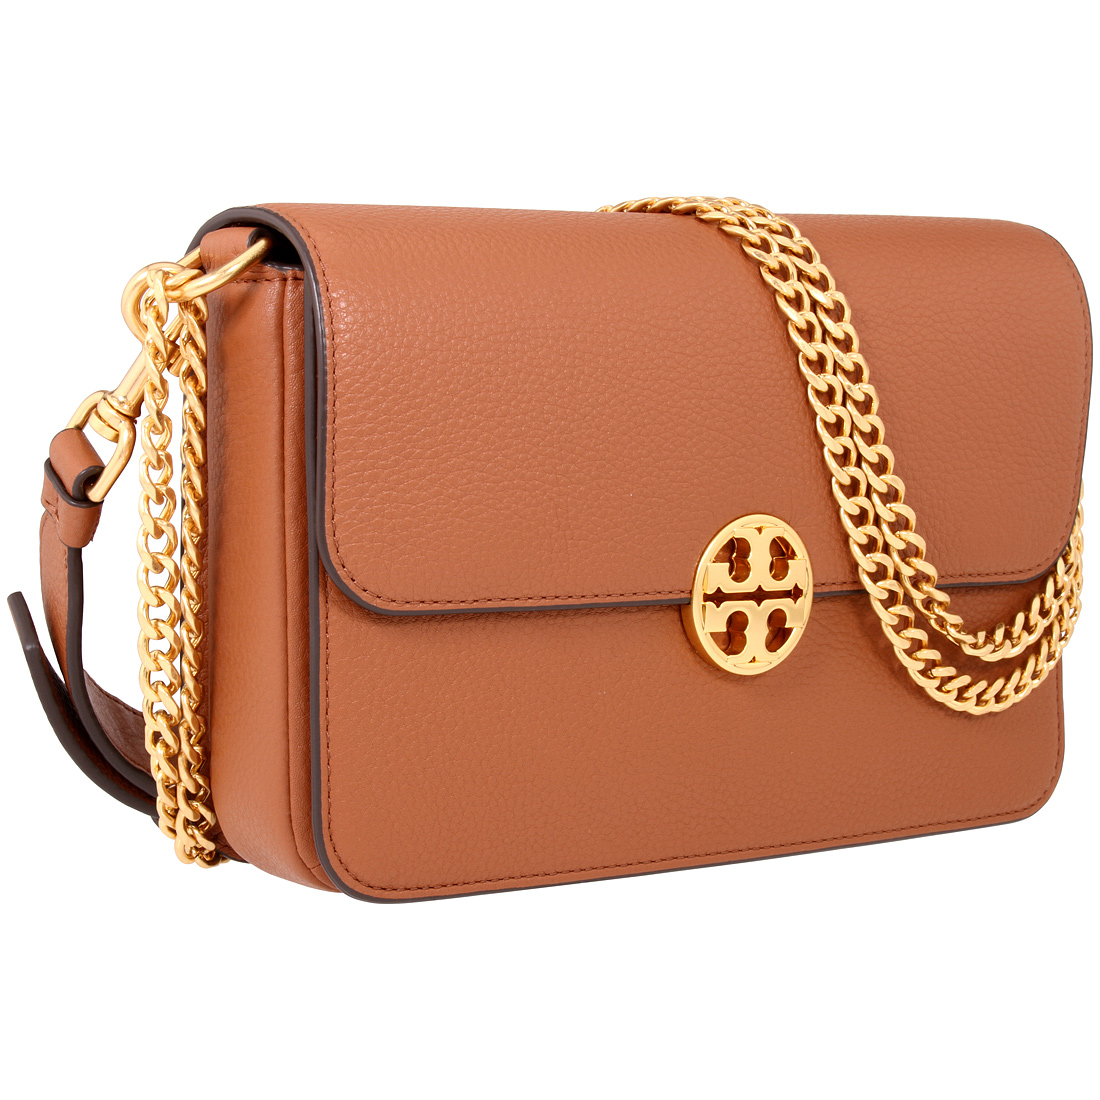 Tory Burch Chelsea Ladies Small Brown Leather Crossbody Bag 48735-905